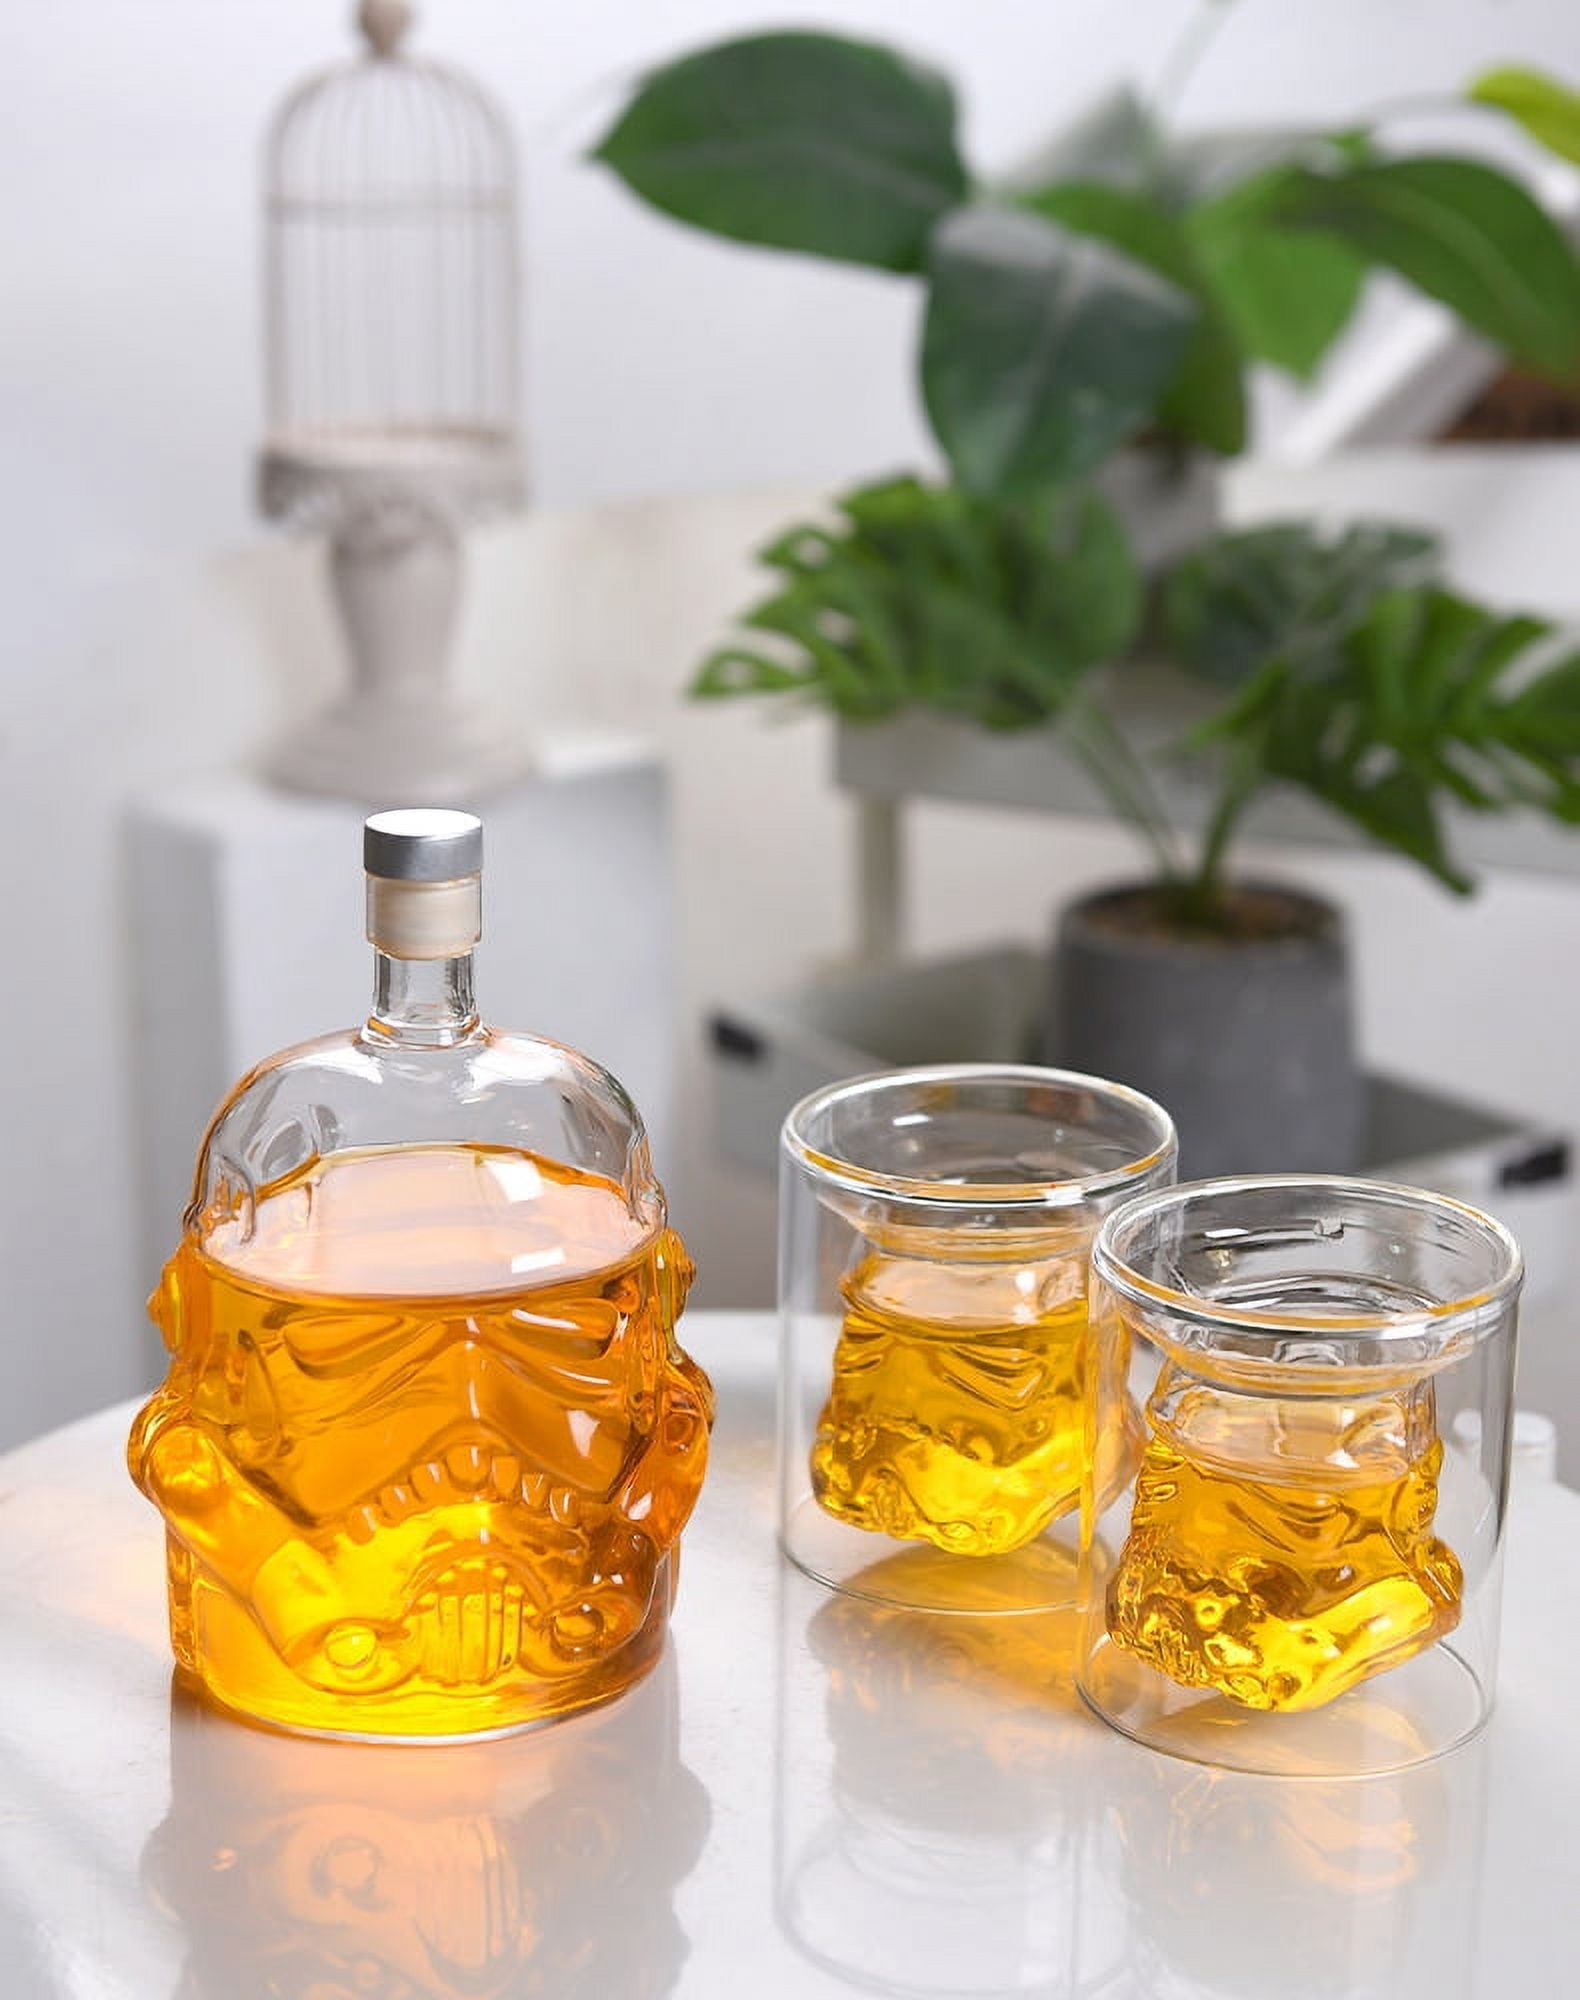 Whiskey Decanter Set With 2 Glasses, Transparent Creative Flask